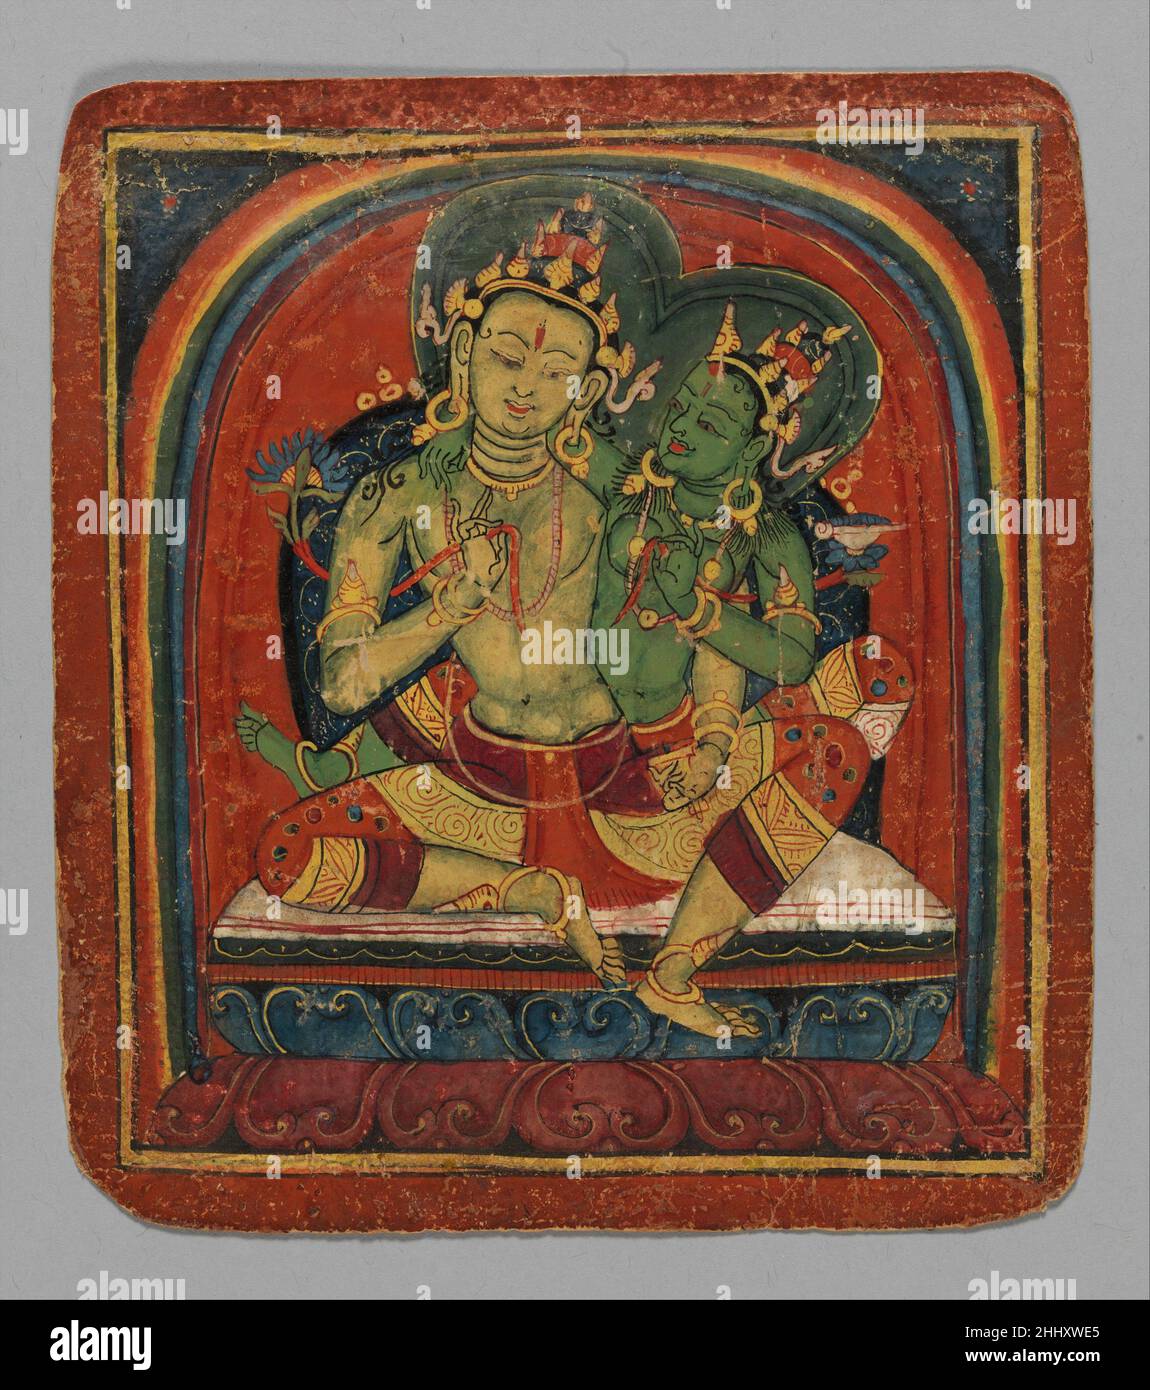 Initiation Card (Tsakalis): Manjushri early 15th century Tibet Tsakali cards were used by itinerant teachers moving from one monastery to another in order to evoke Vajrayana Buddhist deities. When laid on the ground in the form of a mandala, as seen here, they functioned to create a fixed sacred space like that of a temple. The deities shown on these initiation cards include the Tathagata Buddhas, various bodhisattvas, fierce protectors, and the six possible realms of rebirth seen across the bottom. They probably were made by a Nepali artist for a Tibetan patron of the Nyingma school of Tibeta Stock Photo